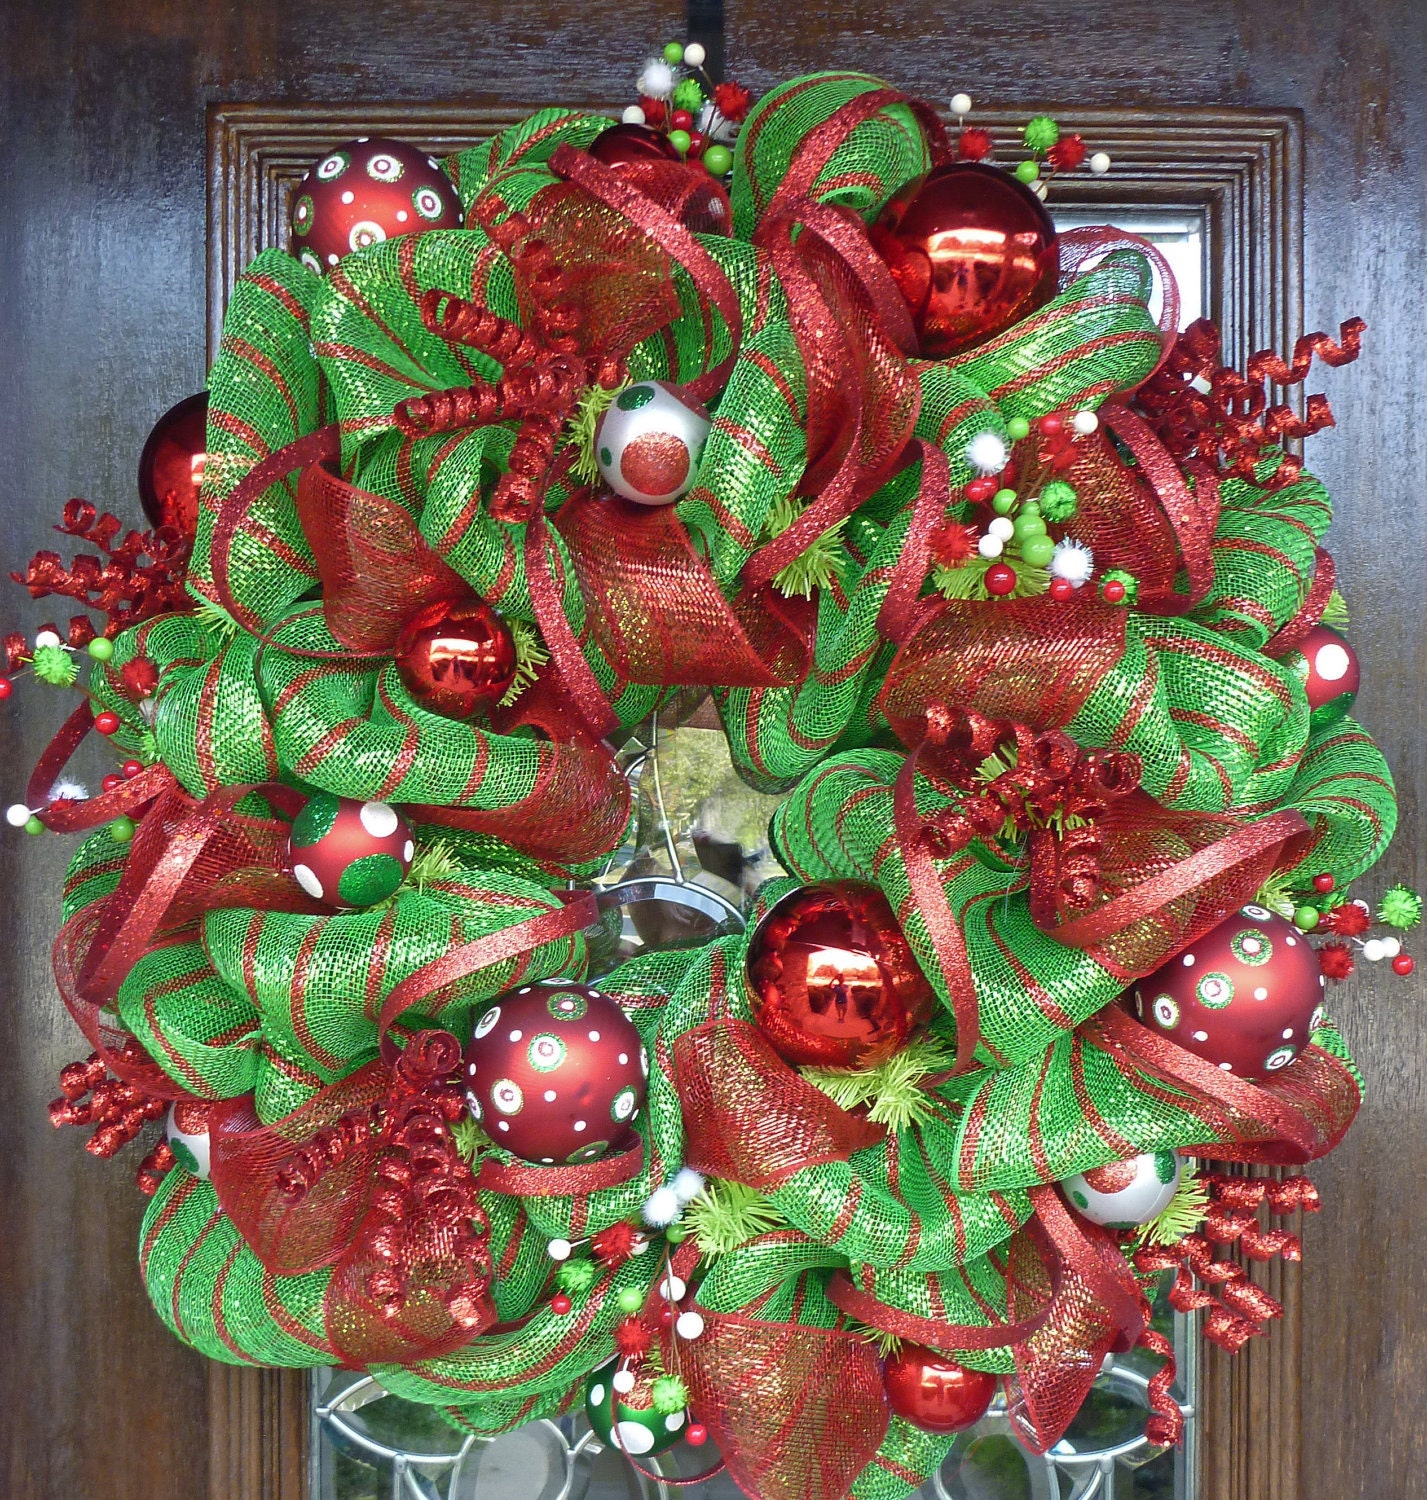 LIME GREEN and RED Deco Mesh Christmas Wreath